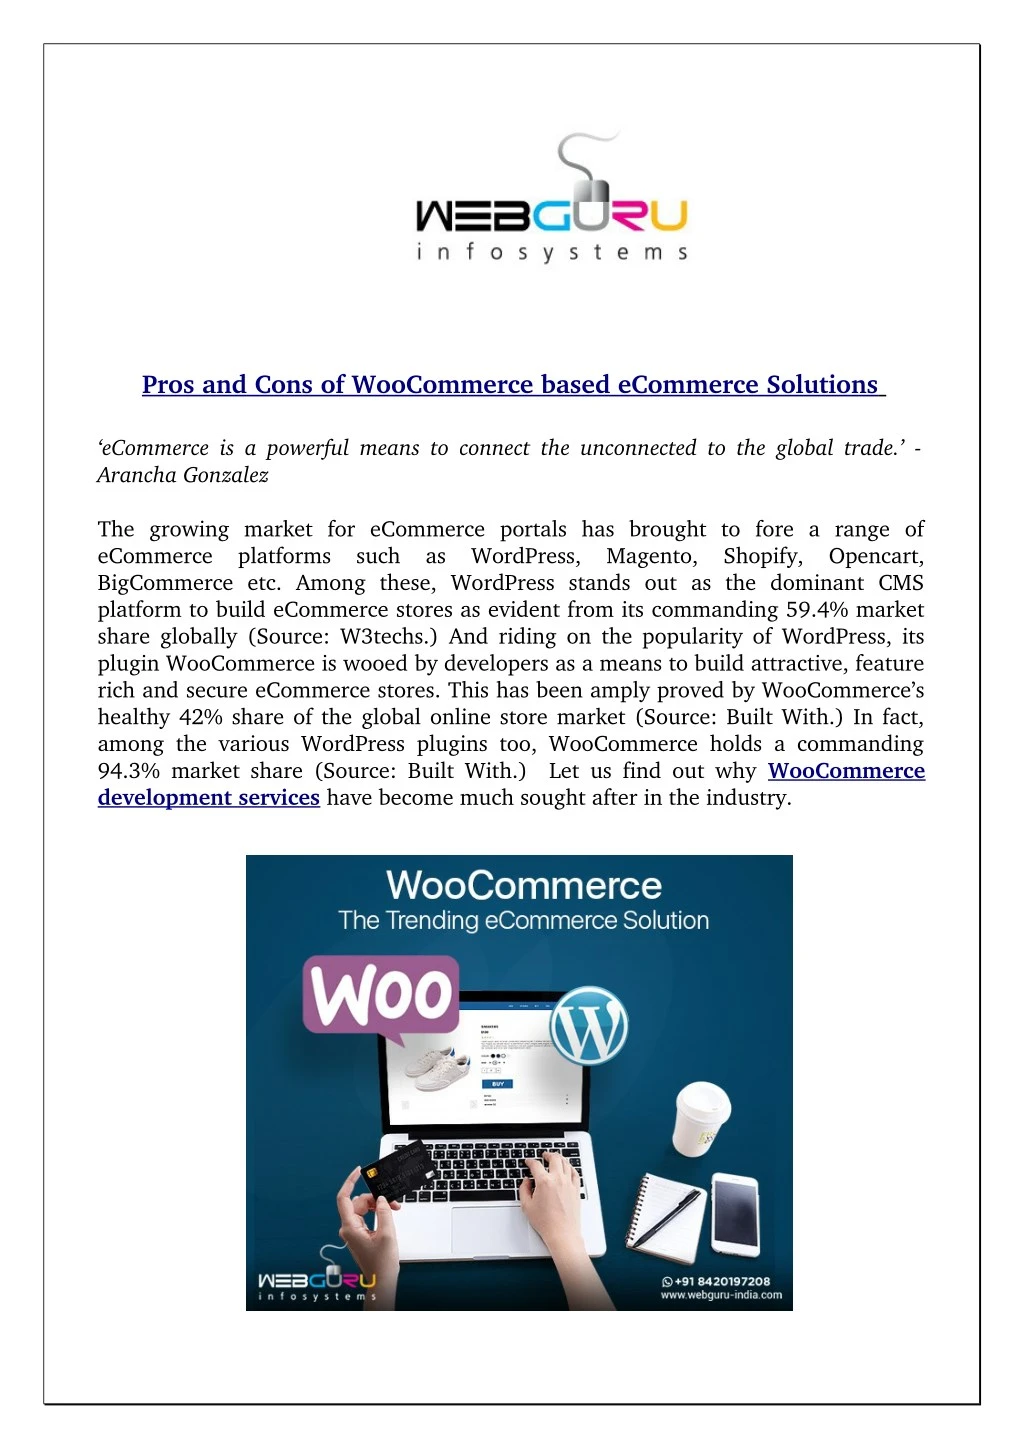 pros and cons of woocommerce based ecommerce